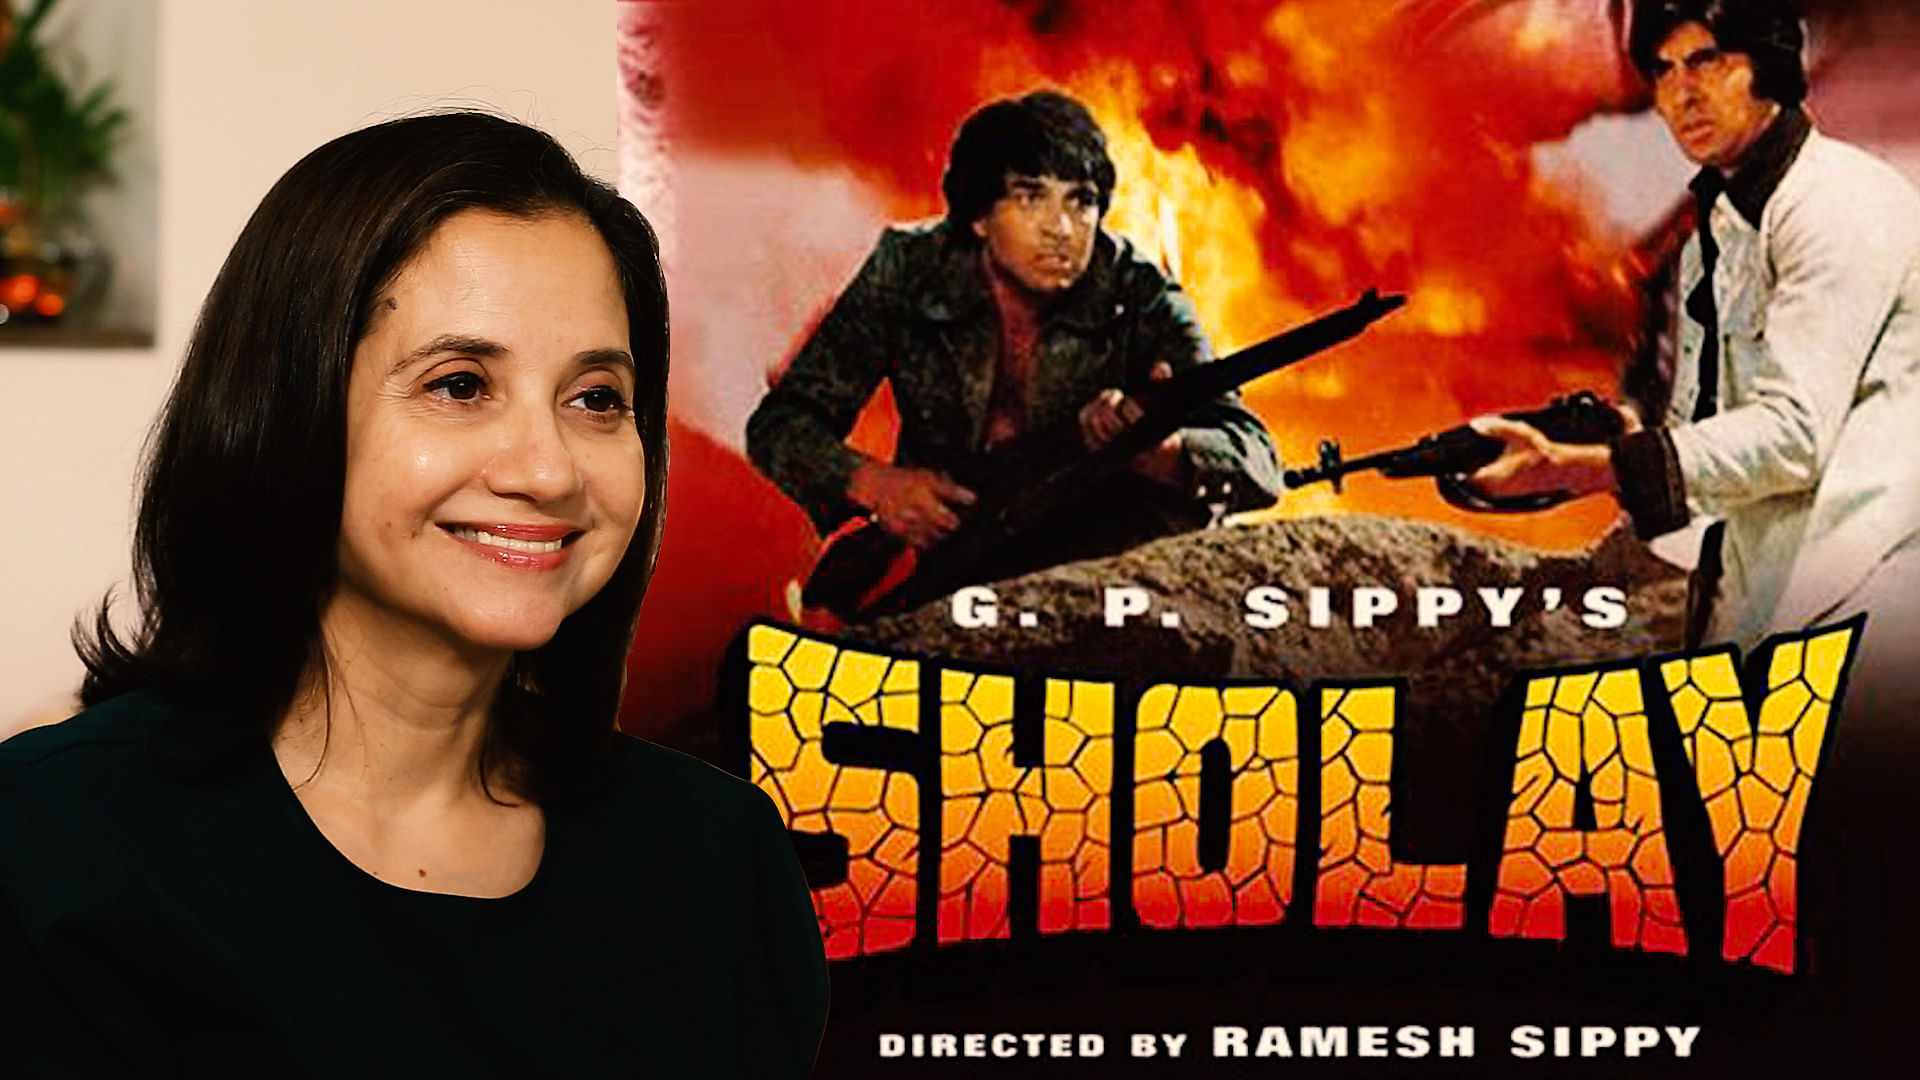 Journalist  Anupama Chopra discusses her book ‘Sholay: The Making of a Classic’.